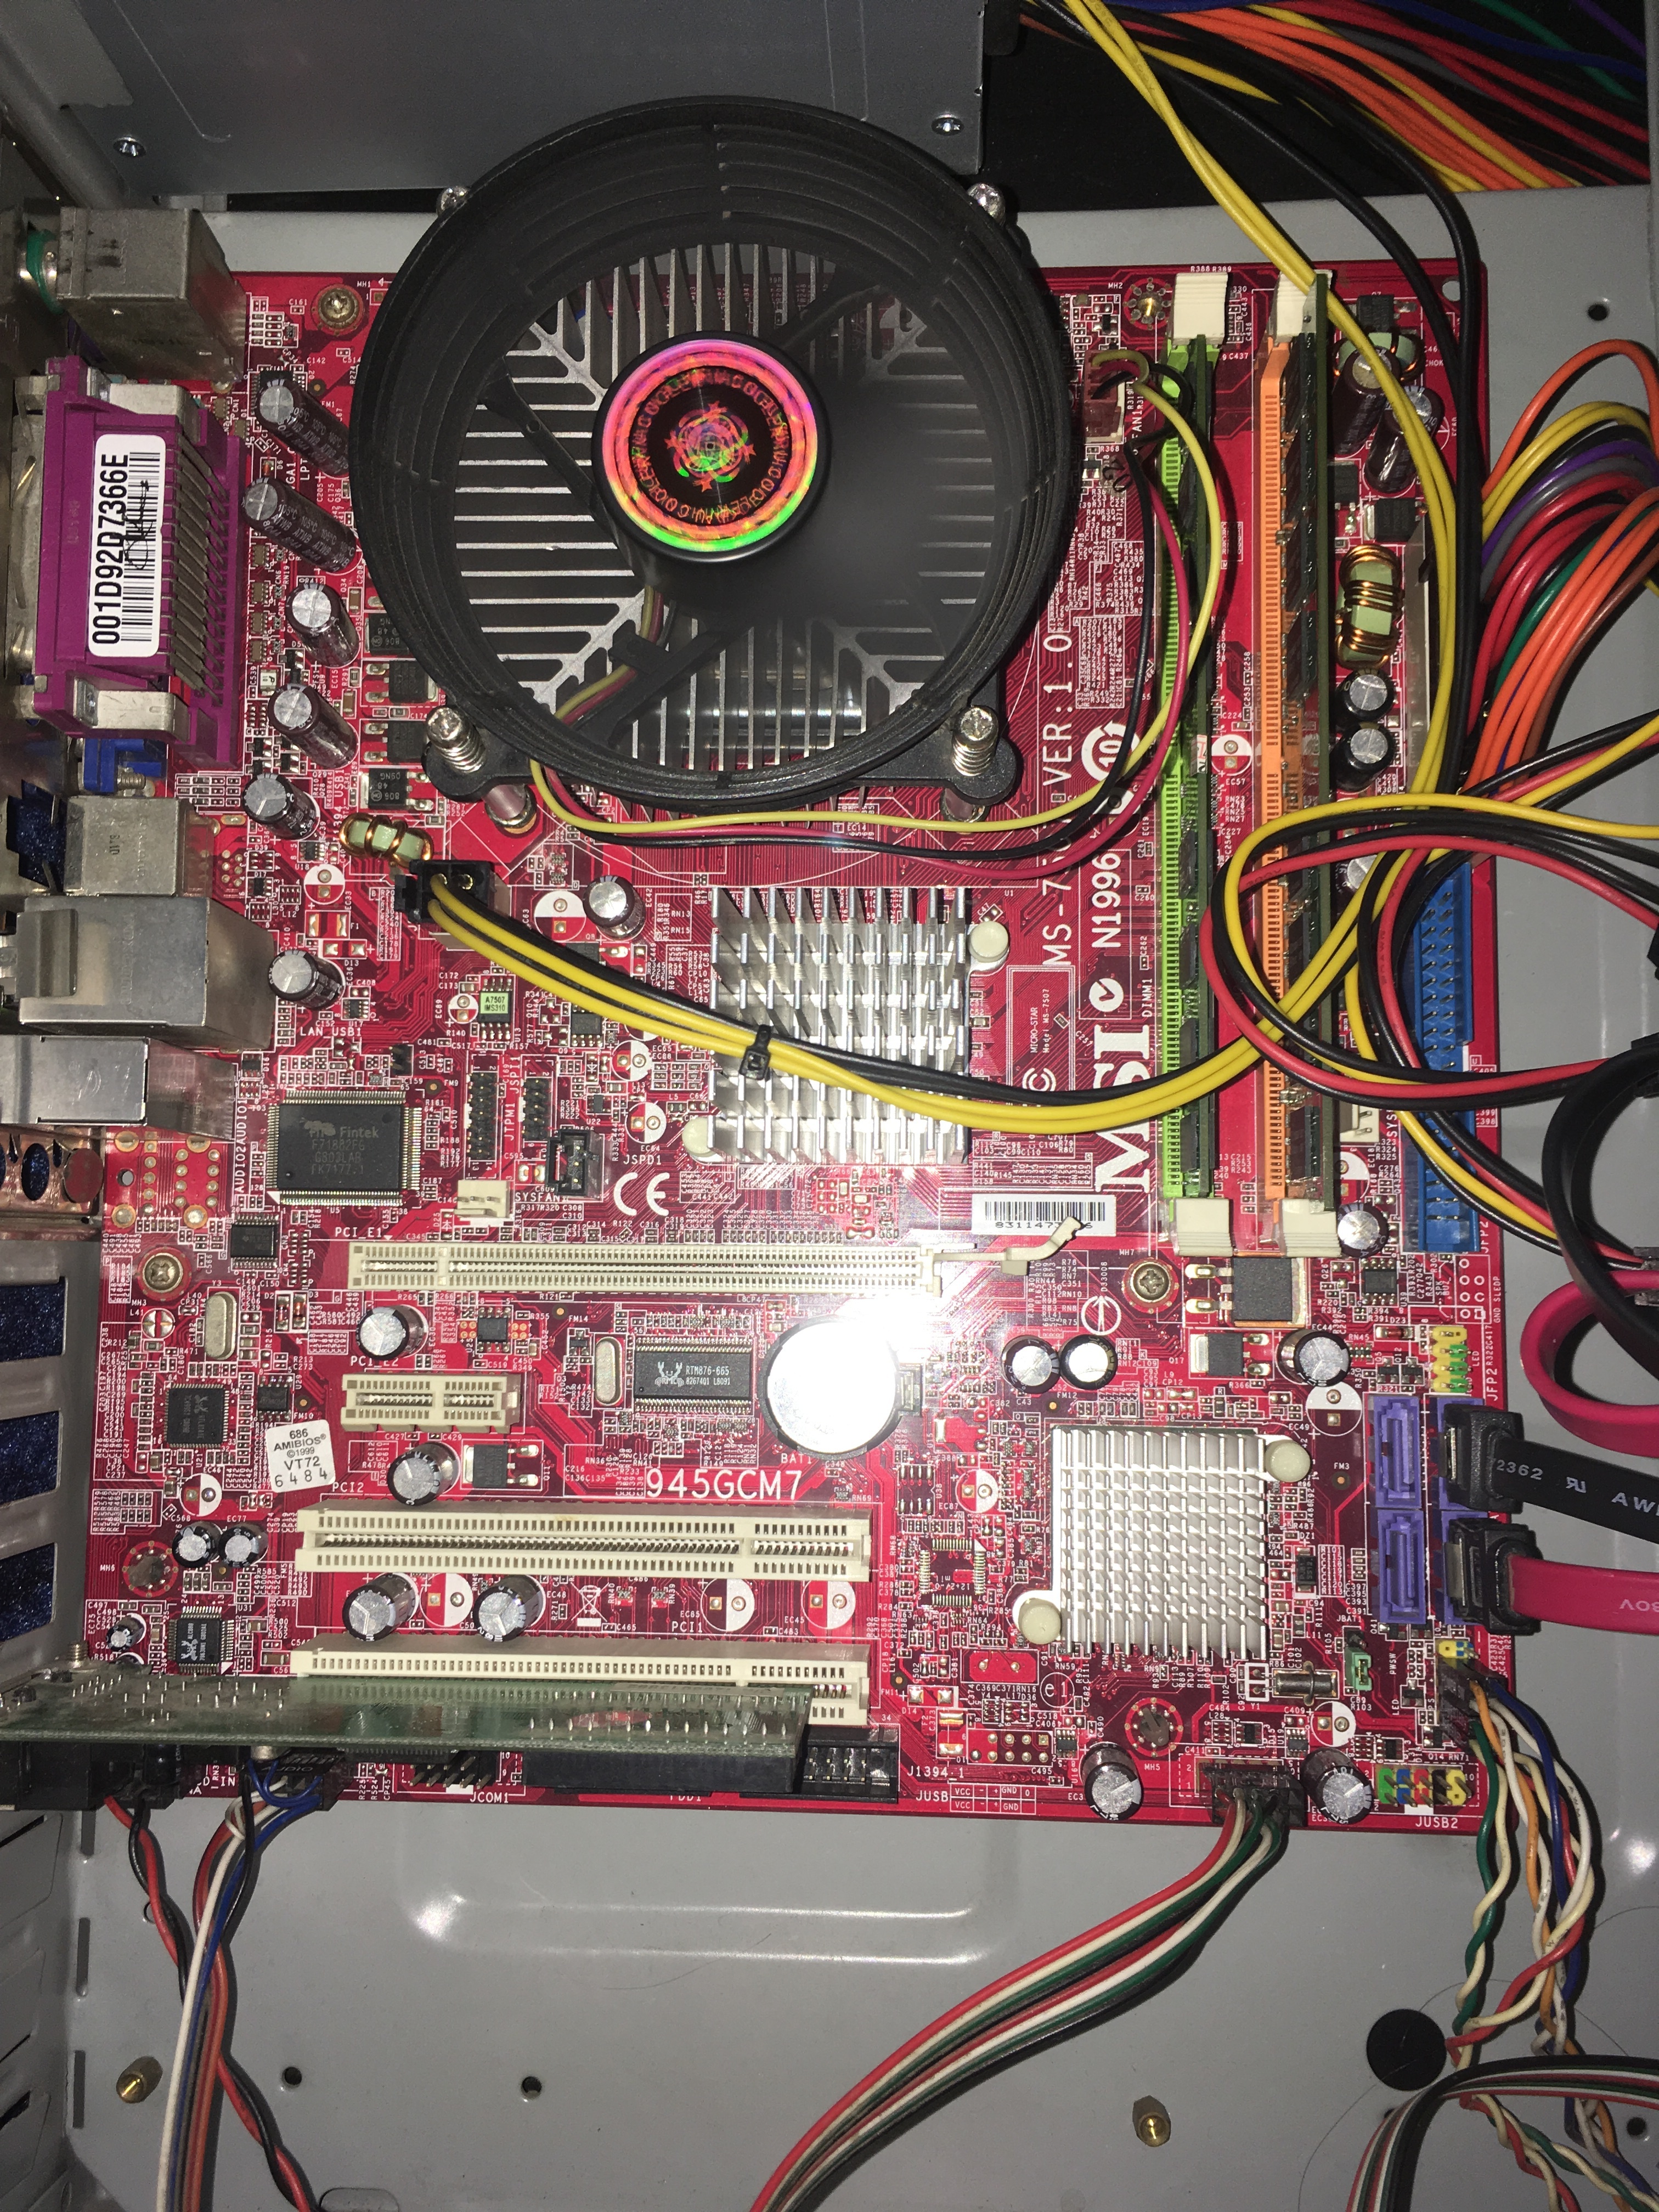 Computer won’t boot until jumper is in bios reset position